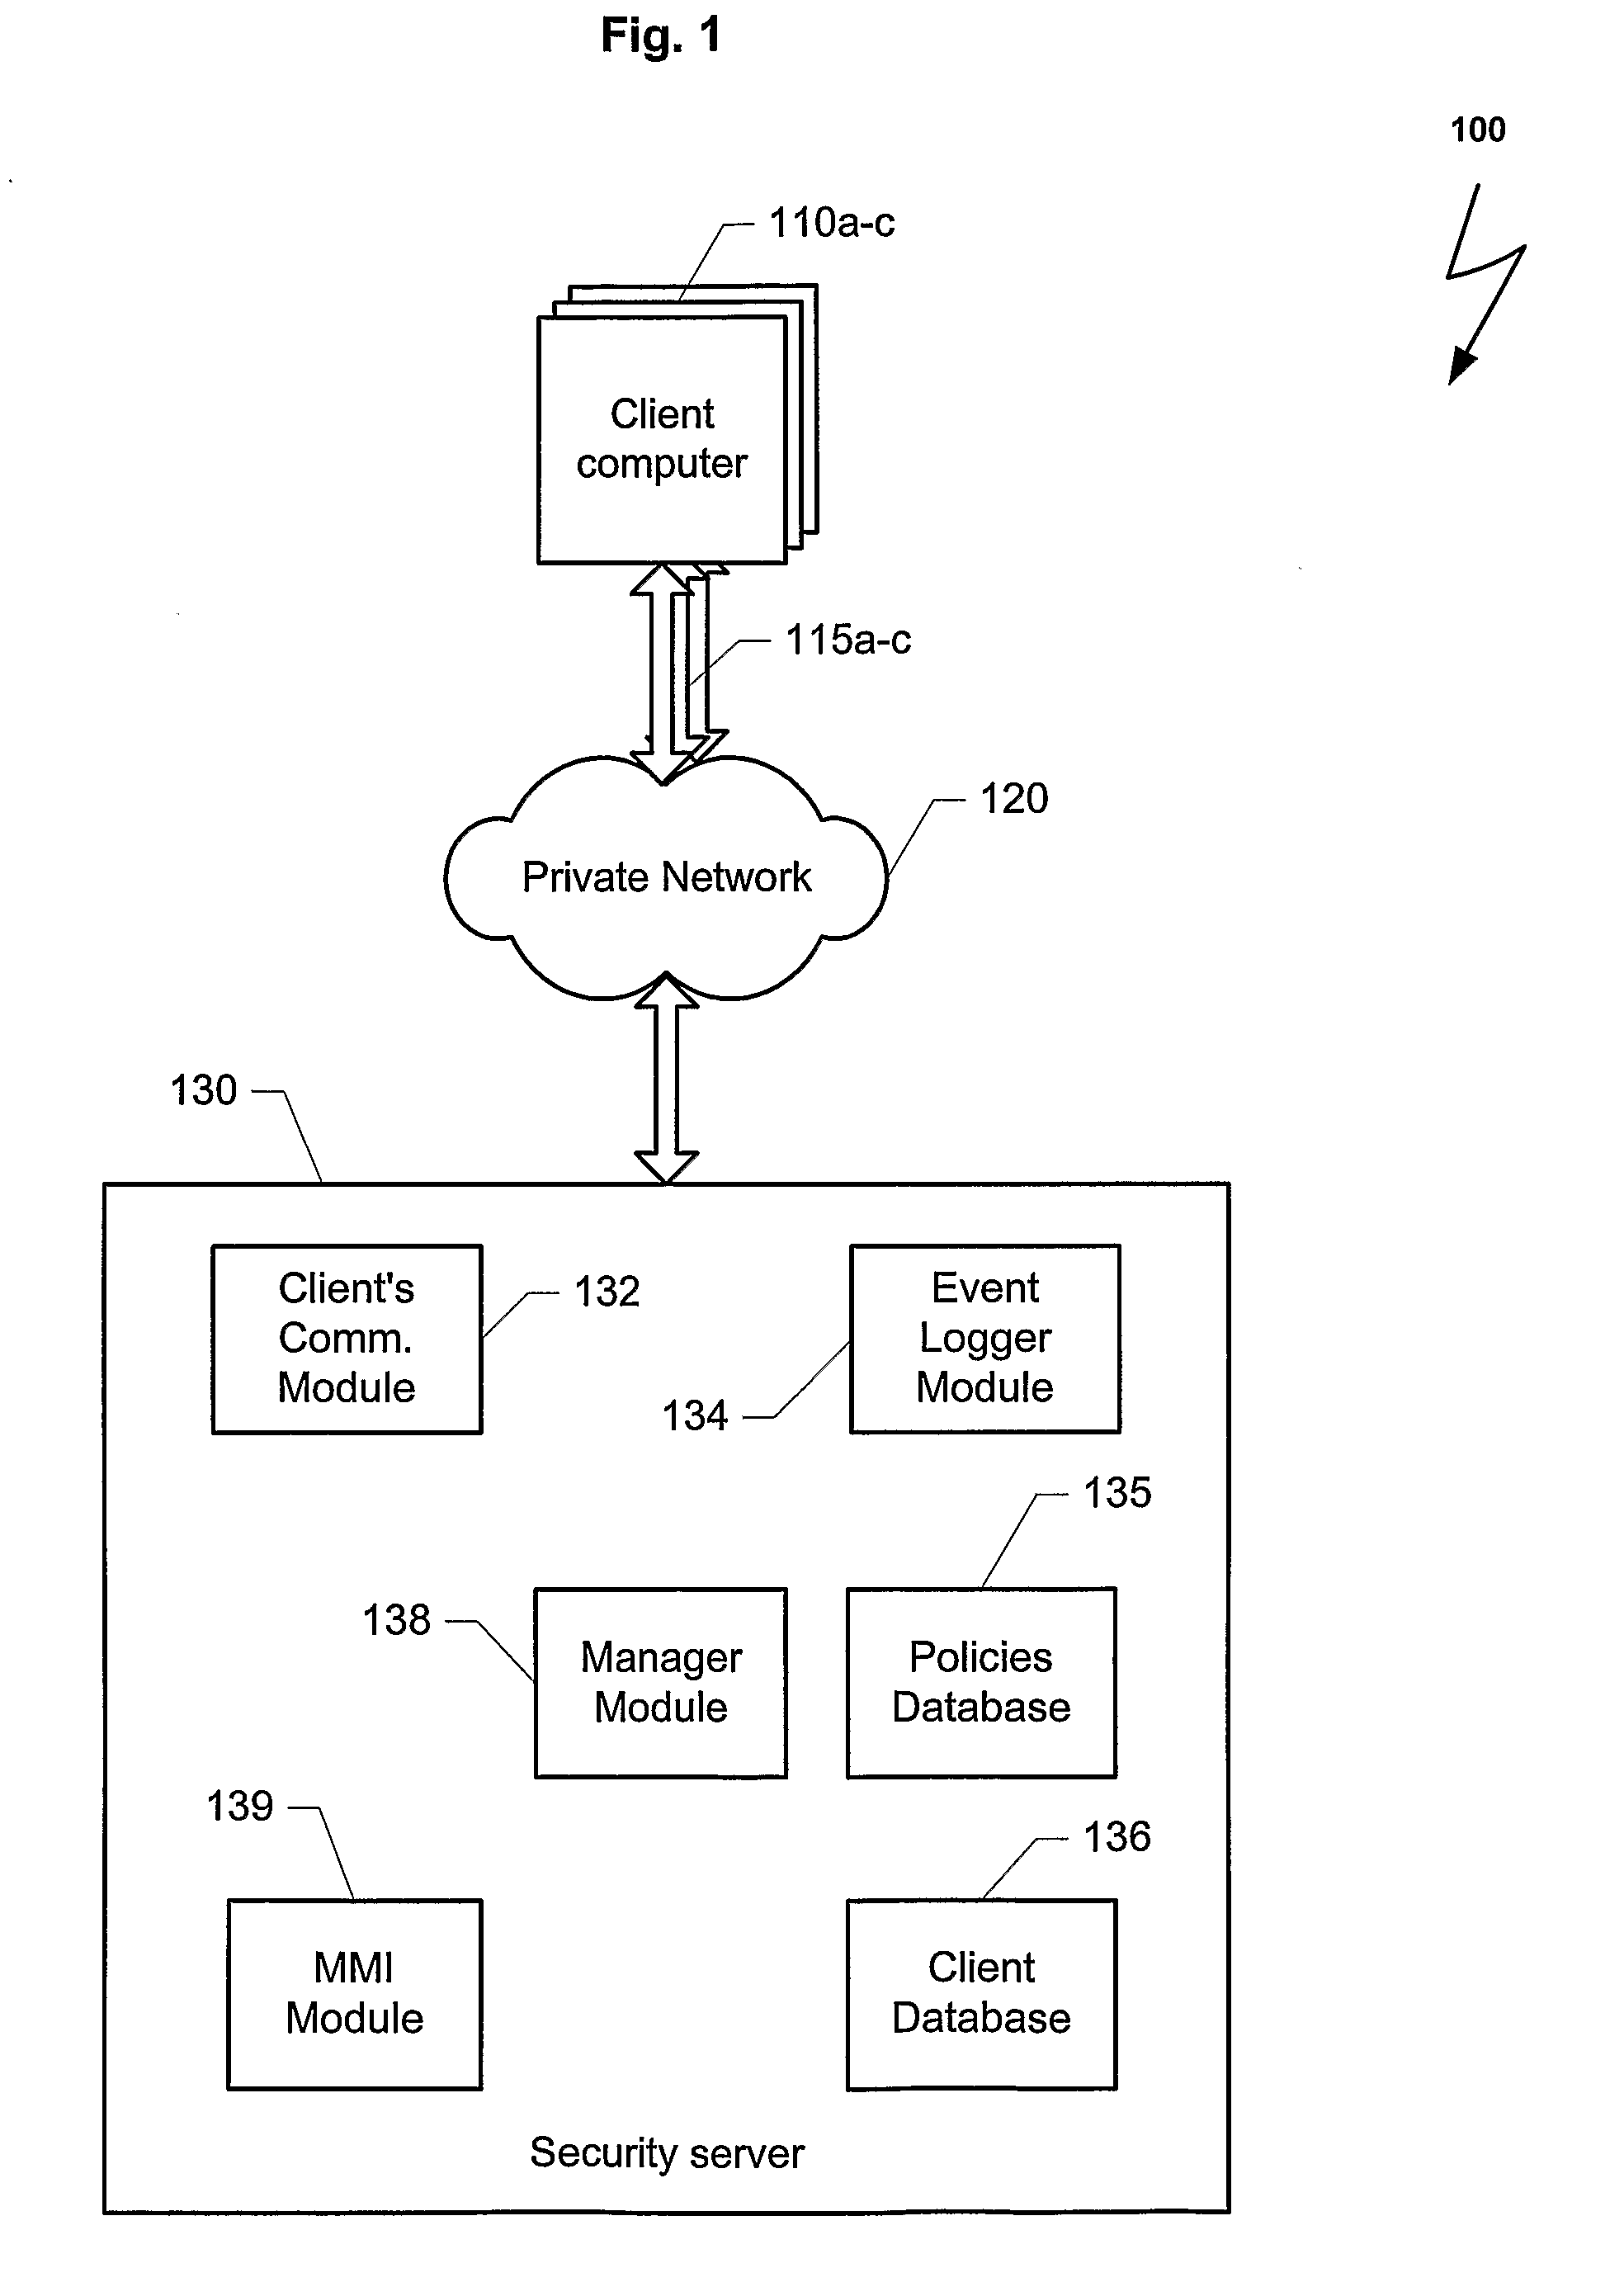 Method and system for improving computer network security